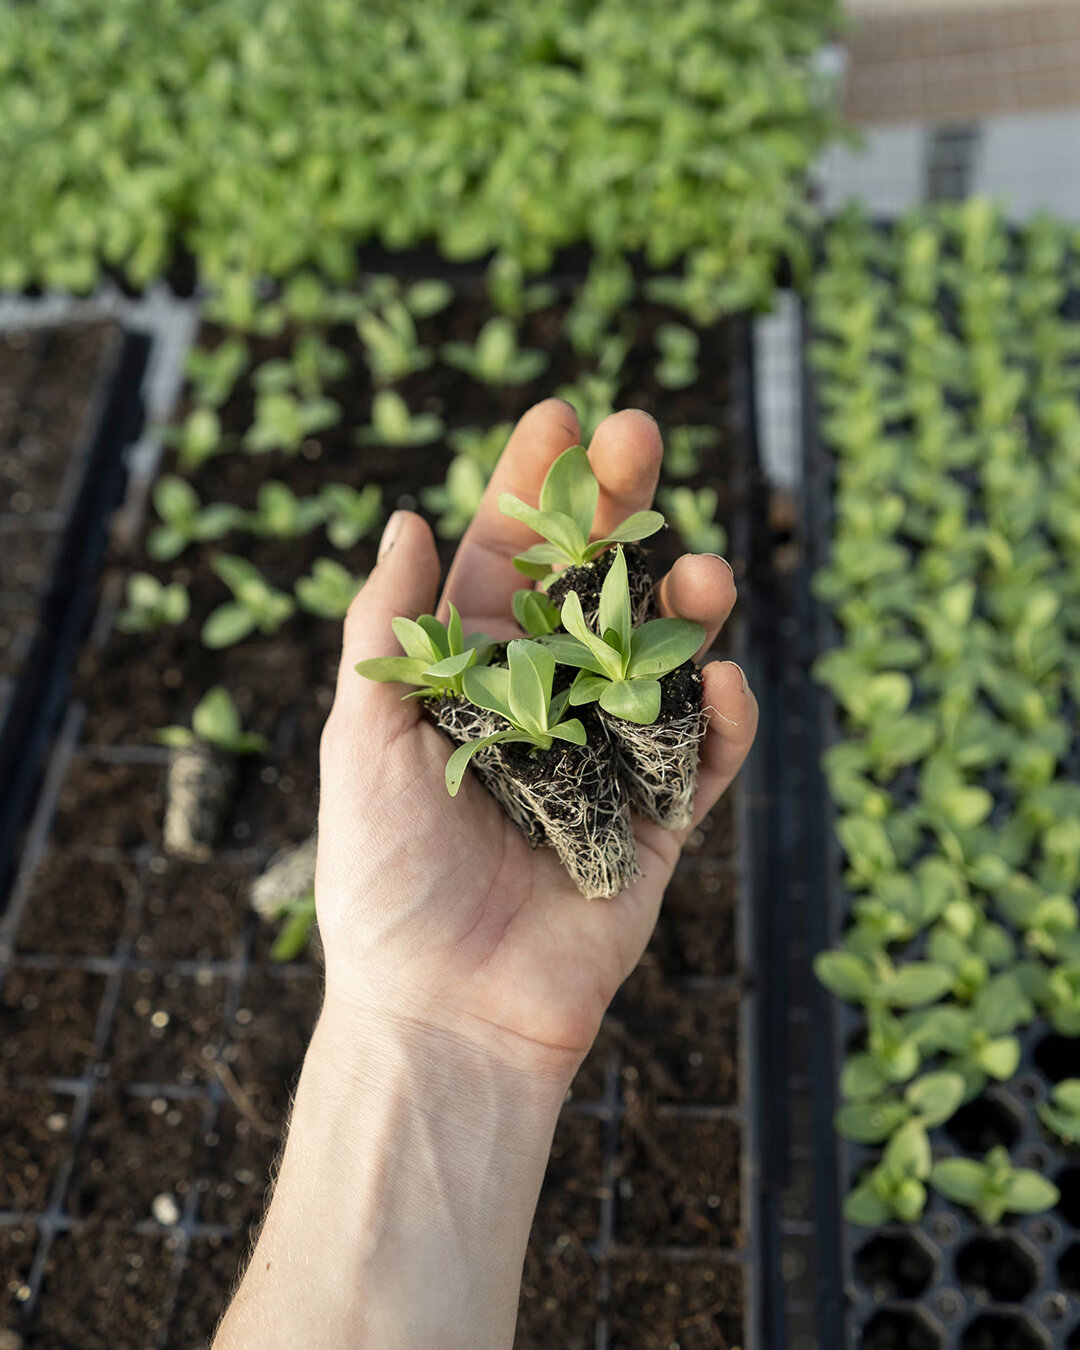 Planting new beginnings, one seedling at a time. 

Happy #EarthDay! Let's celebrate by gardening for a greener future. 🌍 

📸 by Zoe Schaeffer on Unsplash